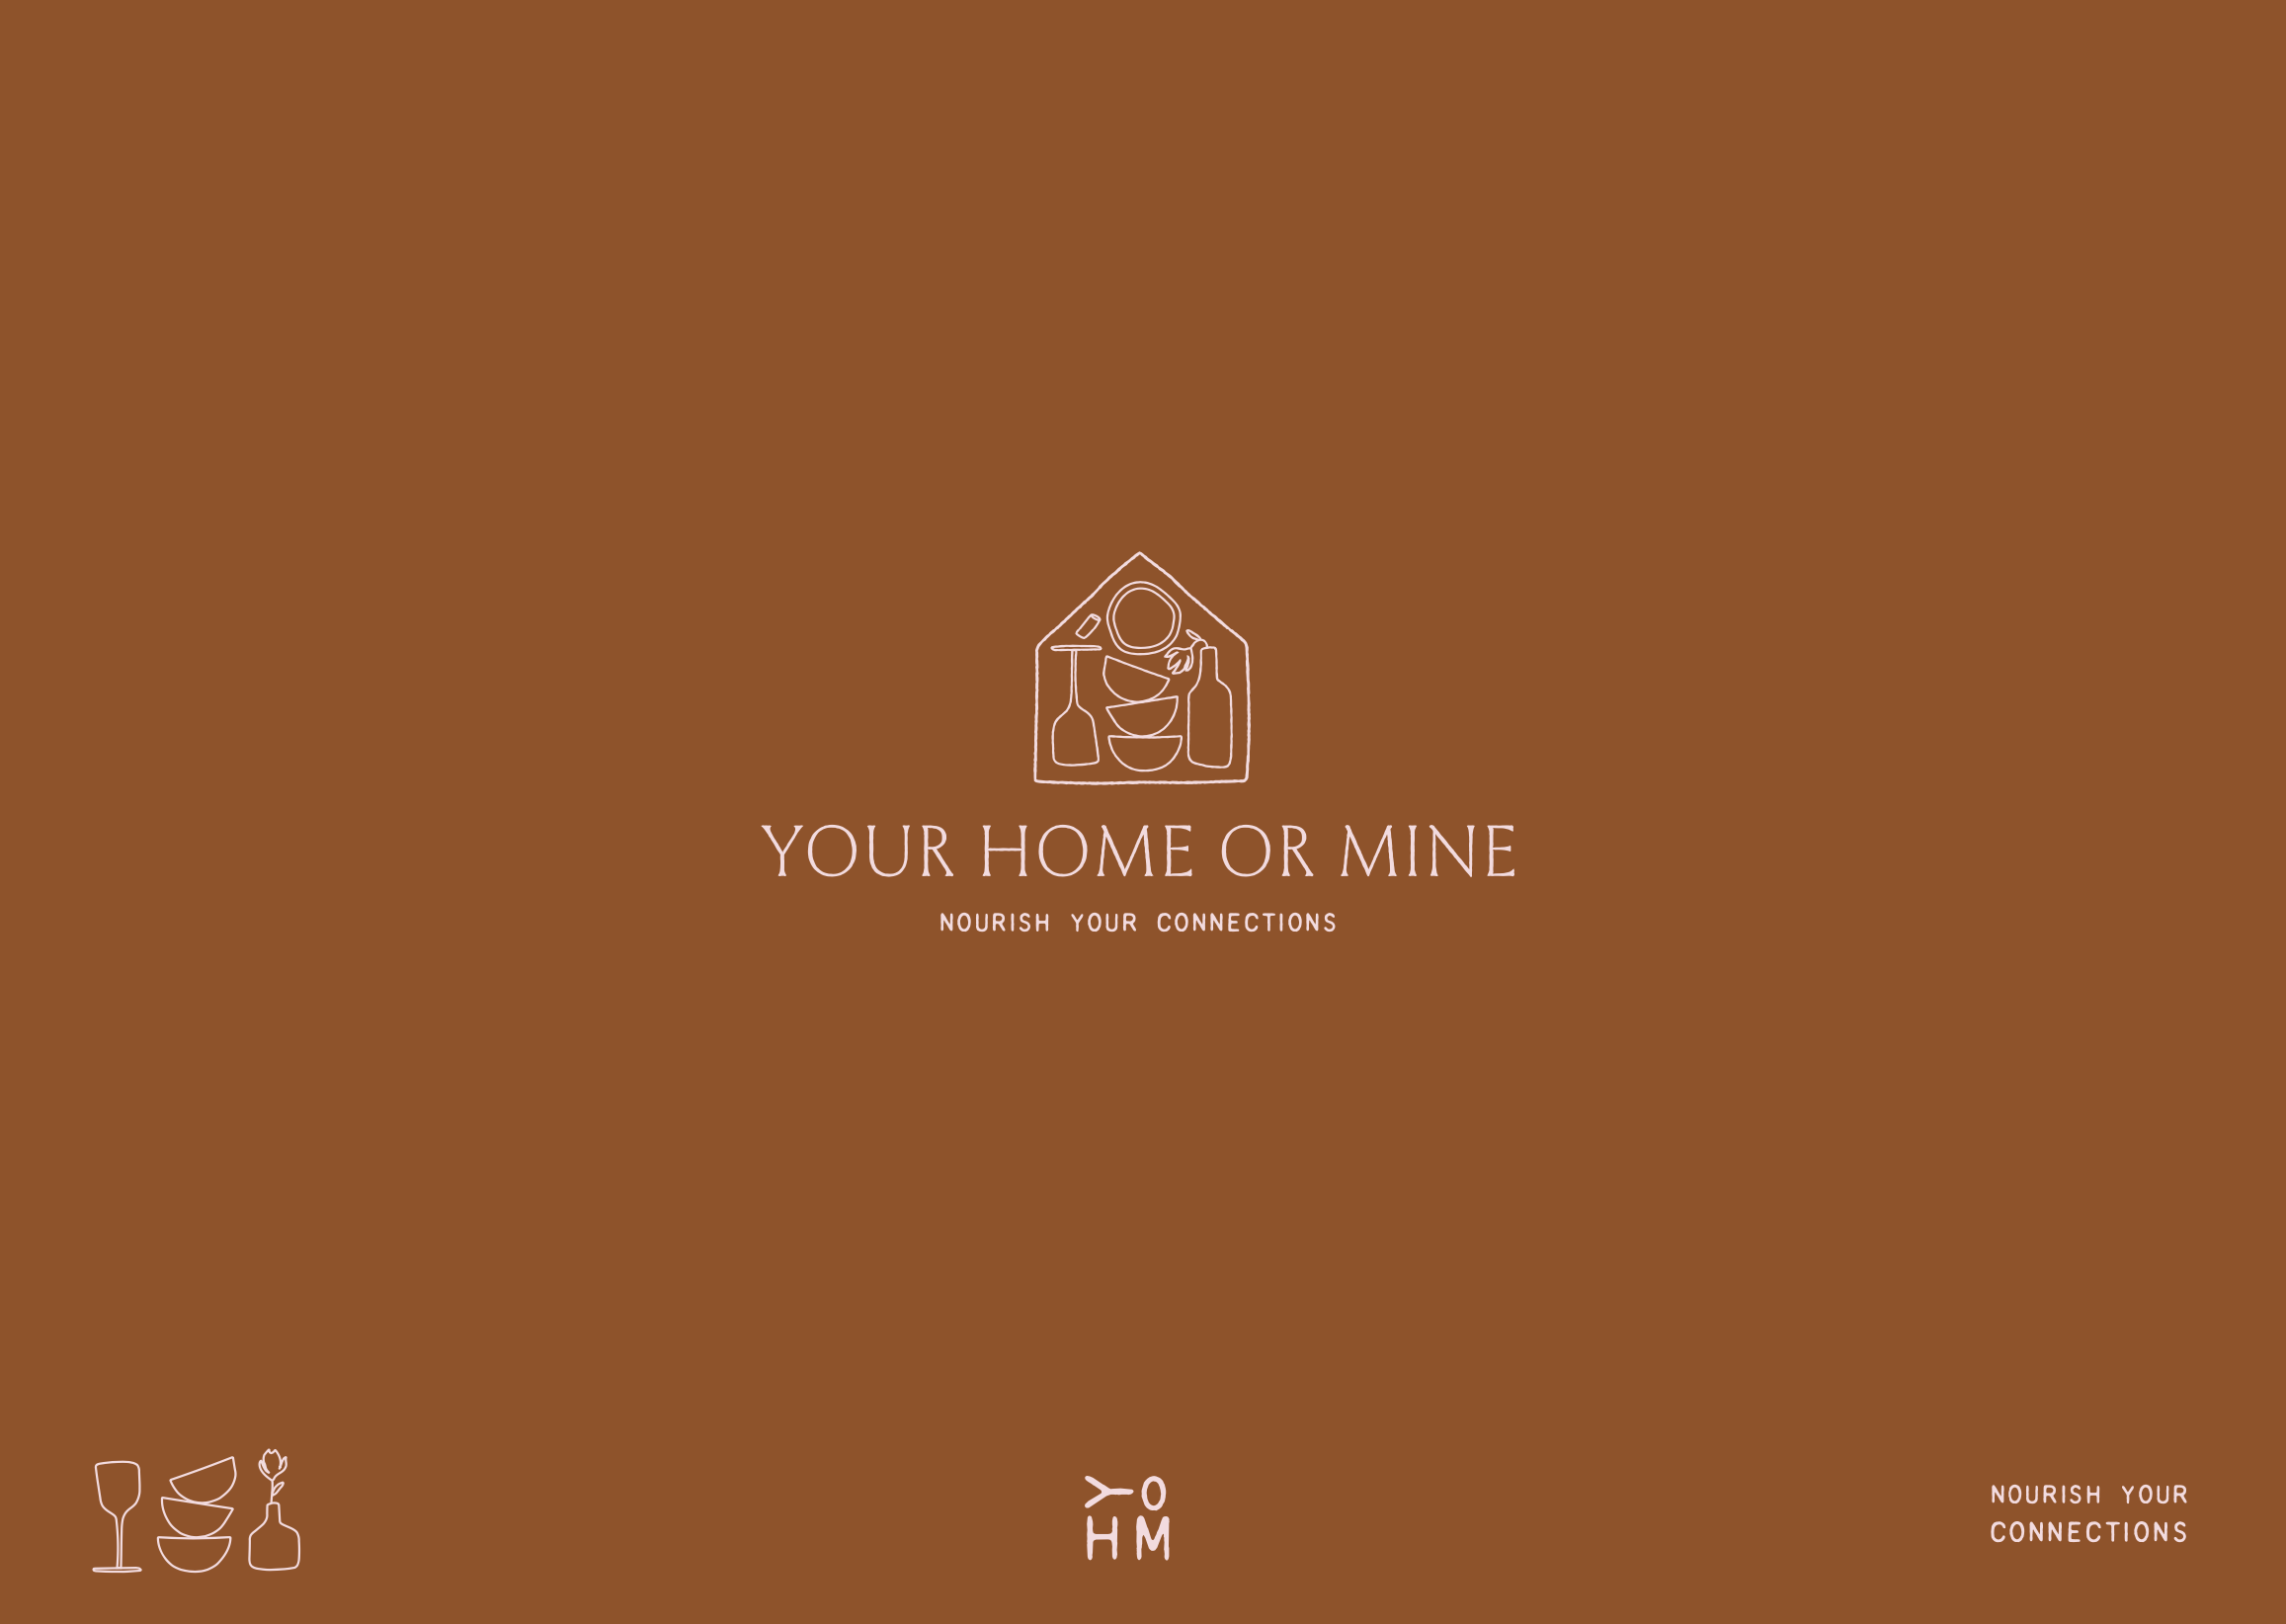 Your Home of Mine - Branding